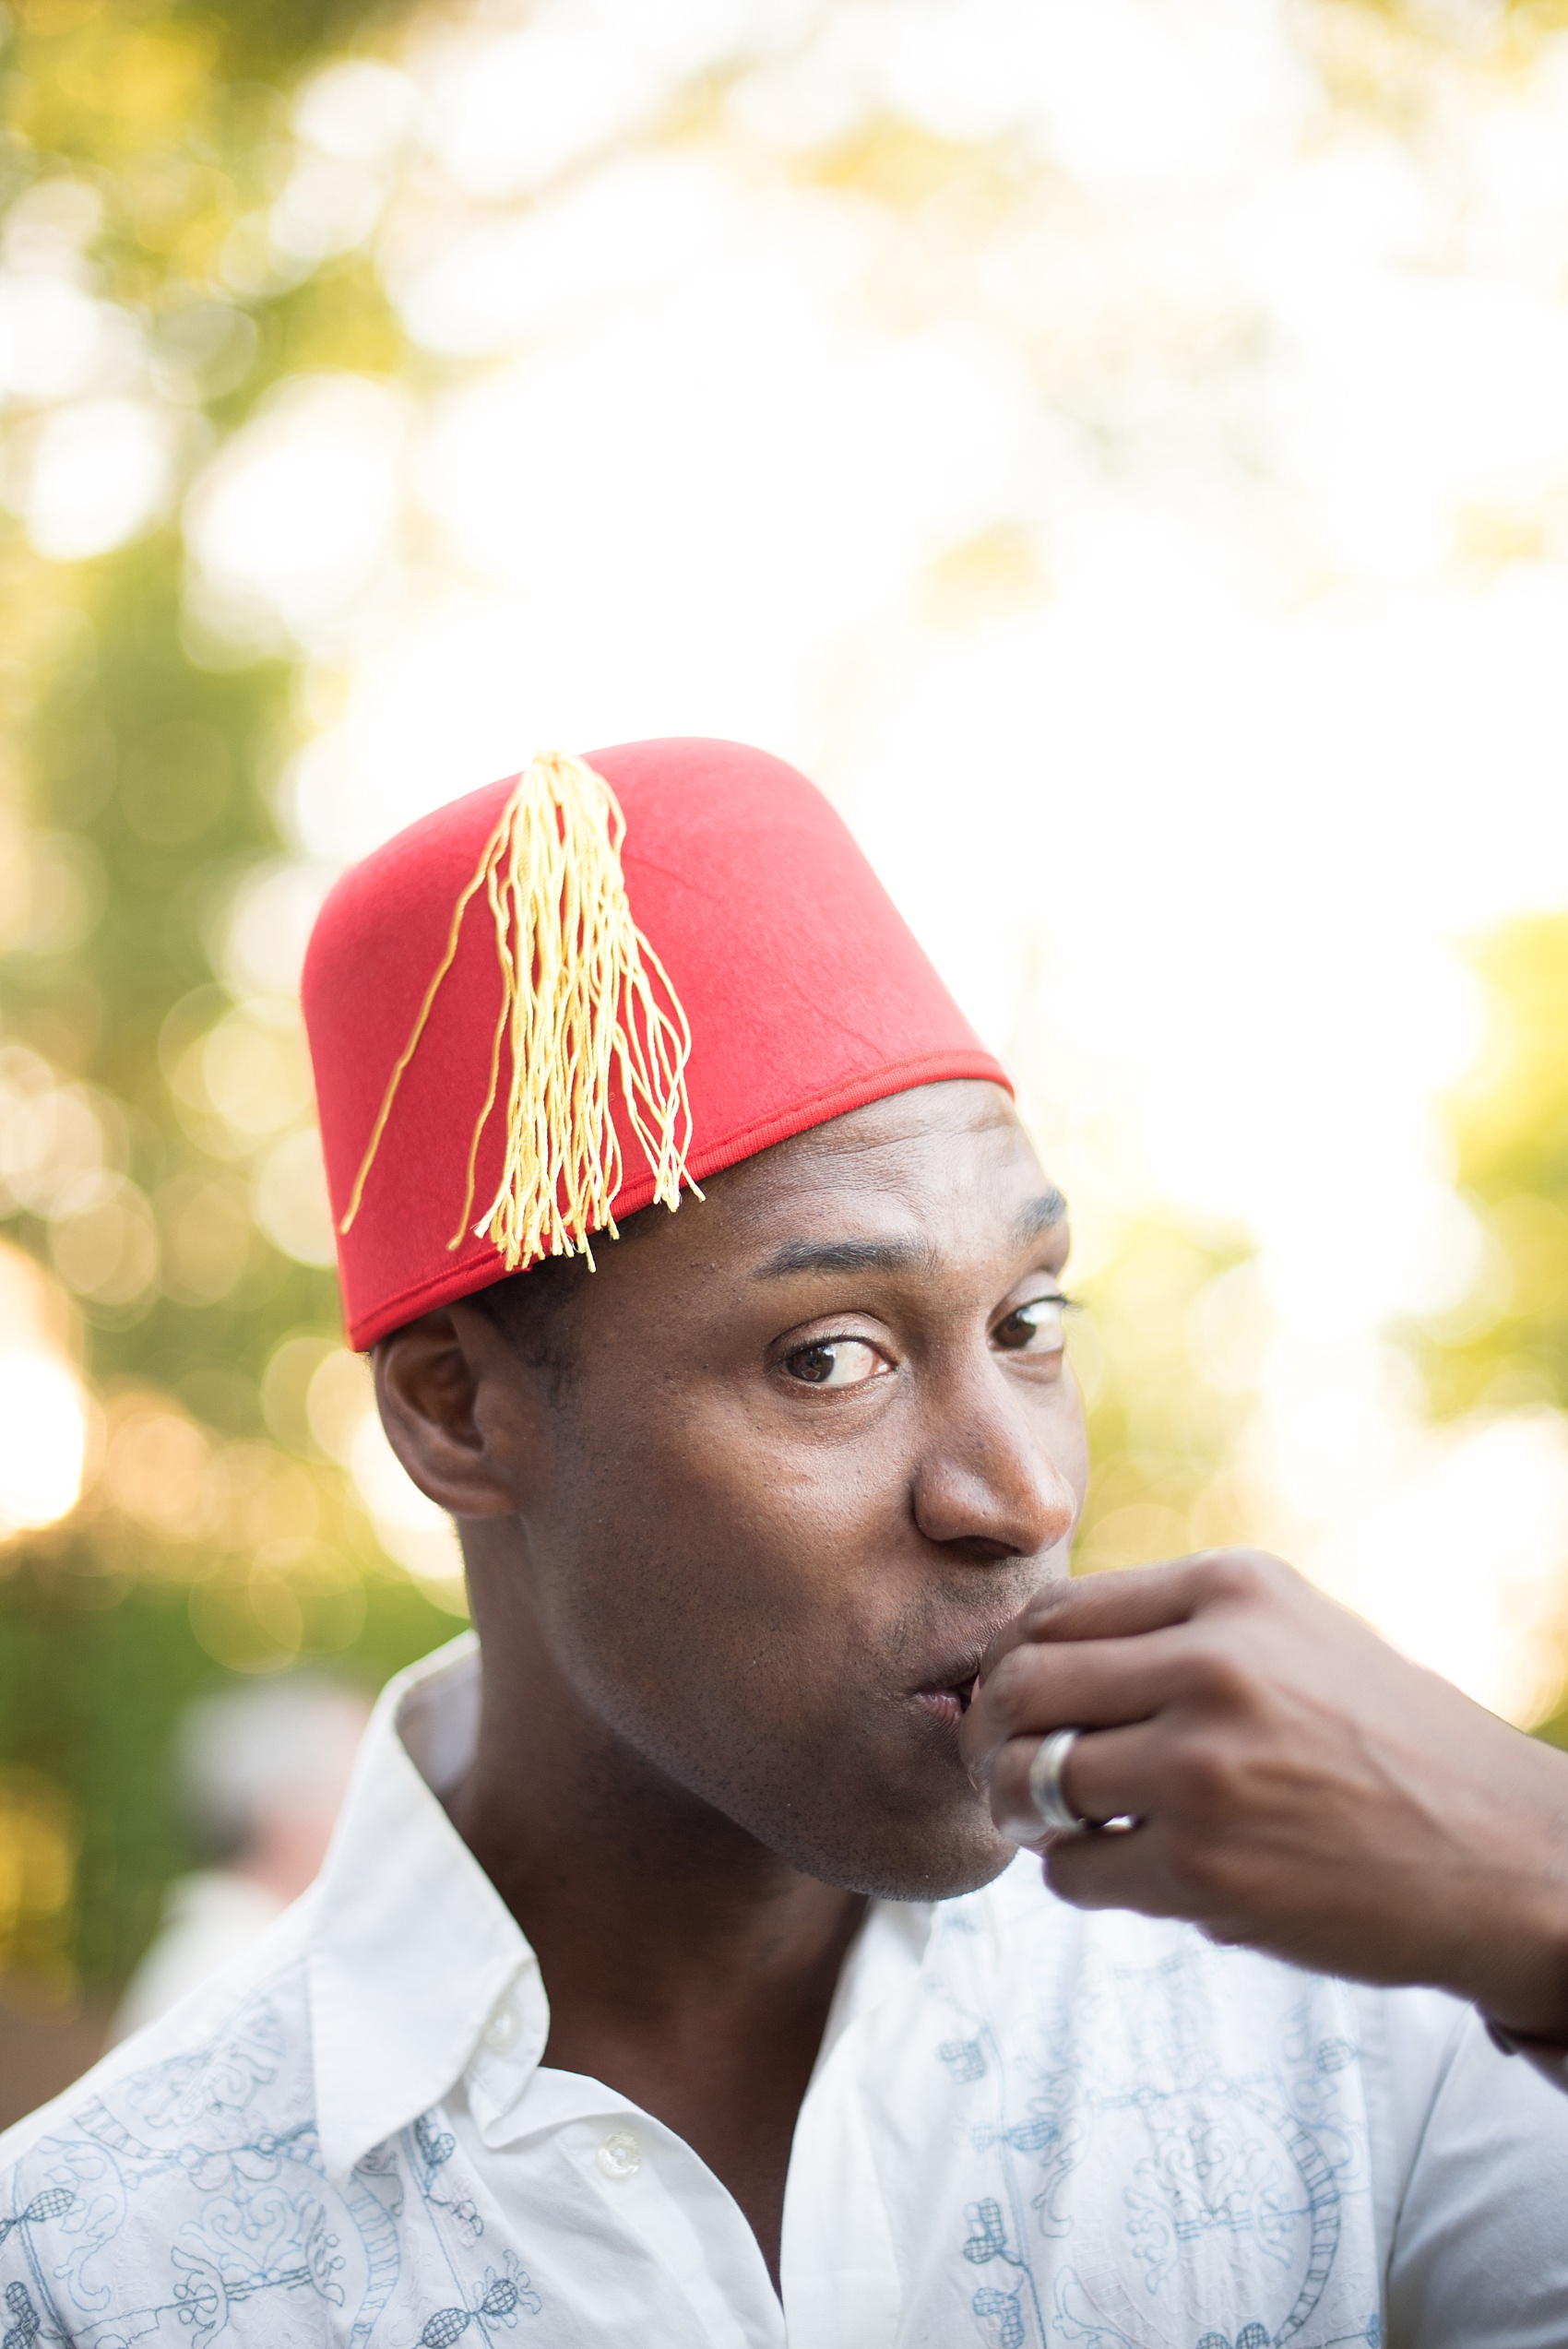 Mikkel Paige Photography photo of Moroccan themed party with festive fez hats.